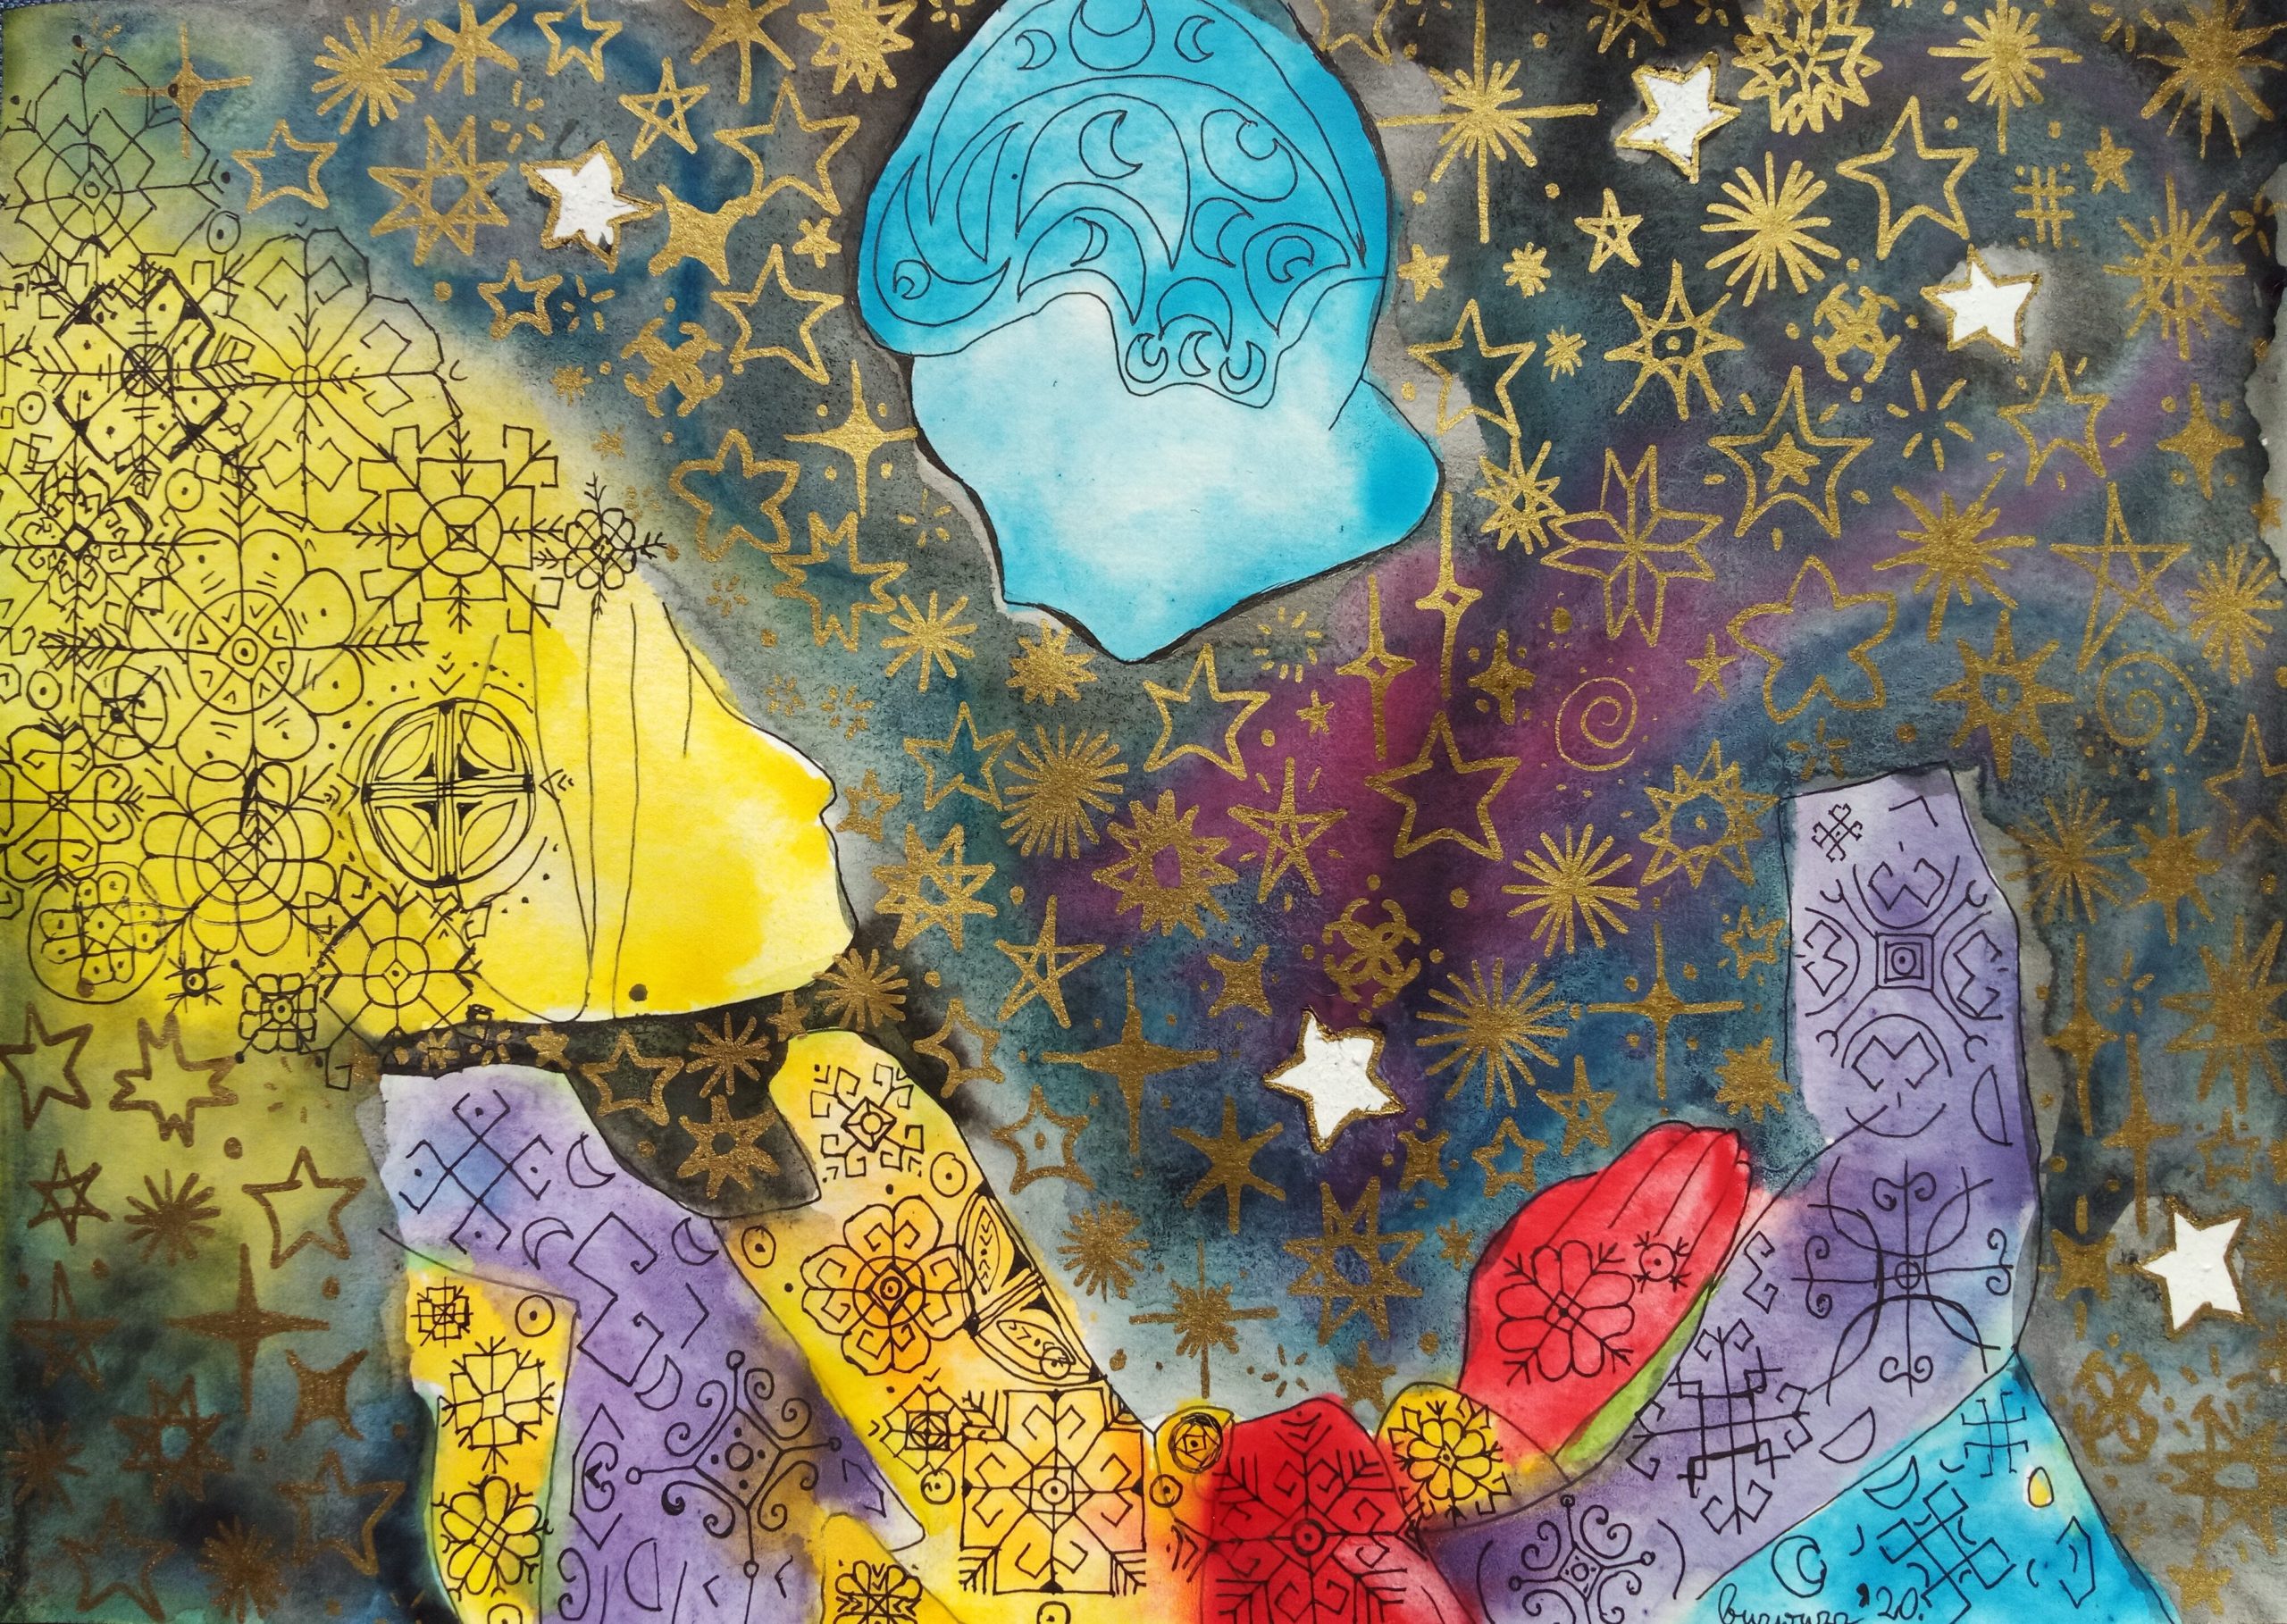 a colorful watercolor of Spuffy cuddling, overlaid with stars and ornaments